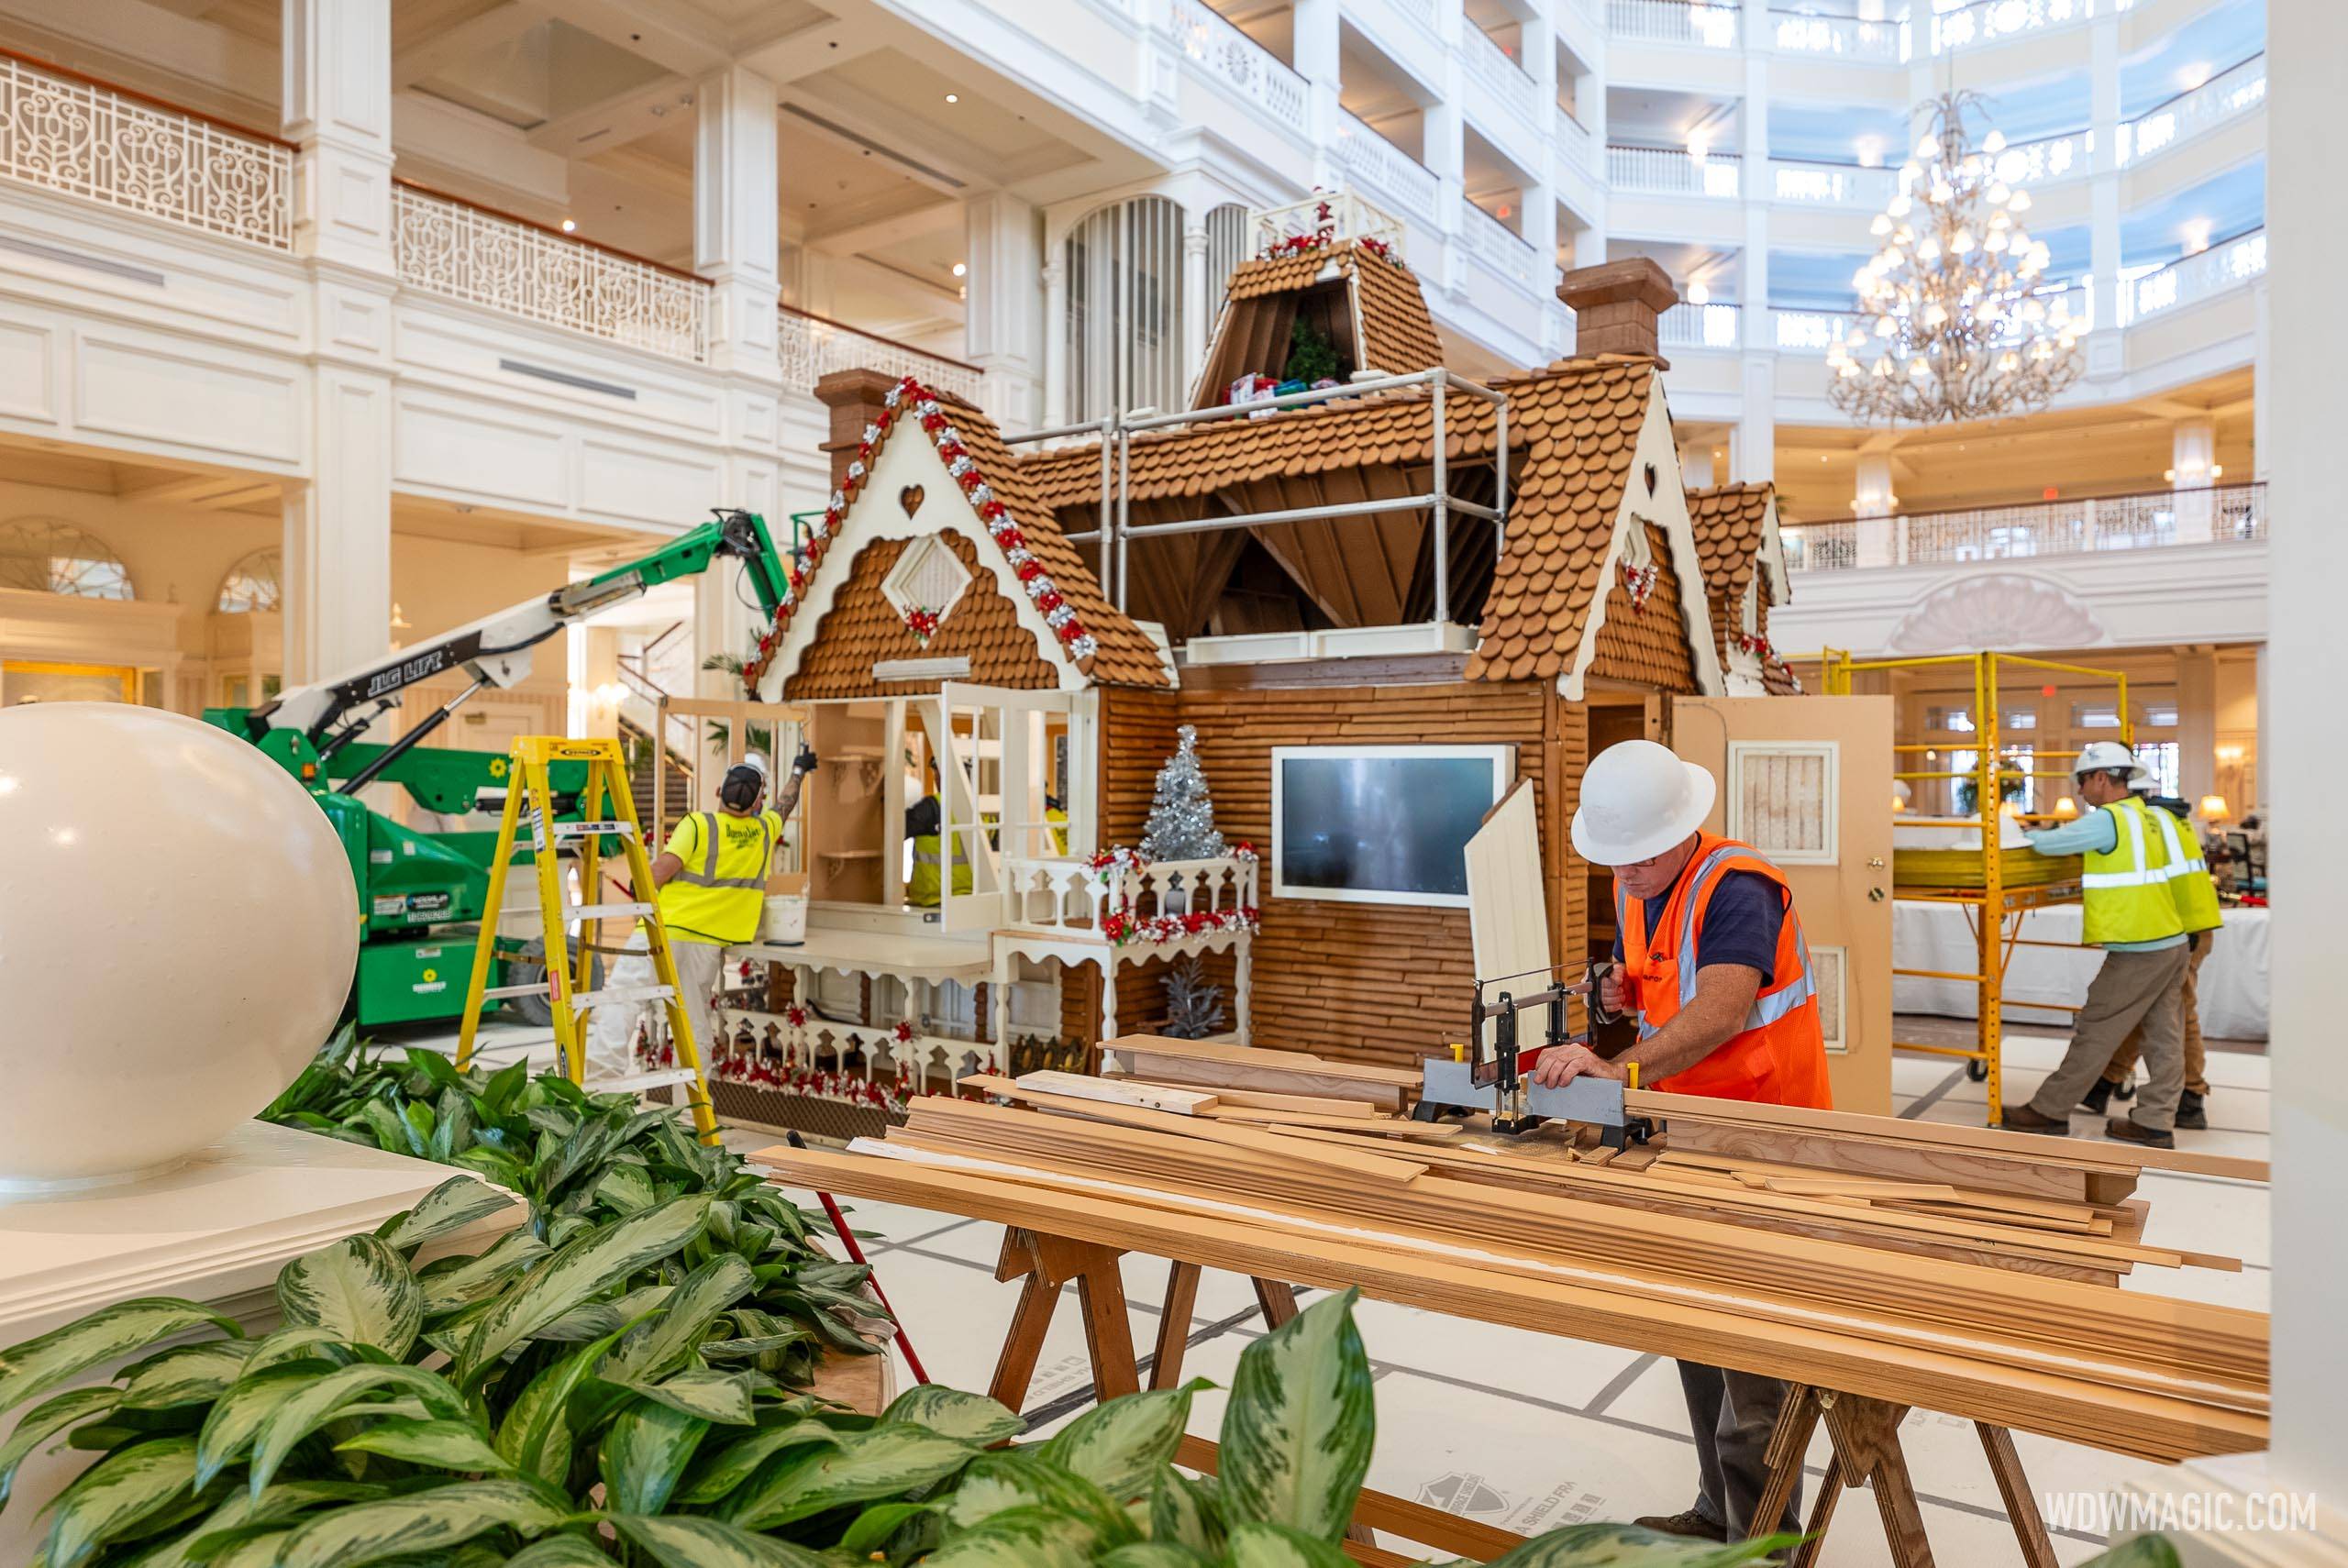 2023 Gingerbread House construction at Disney's Grand Floridian Resort